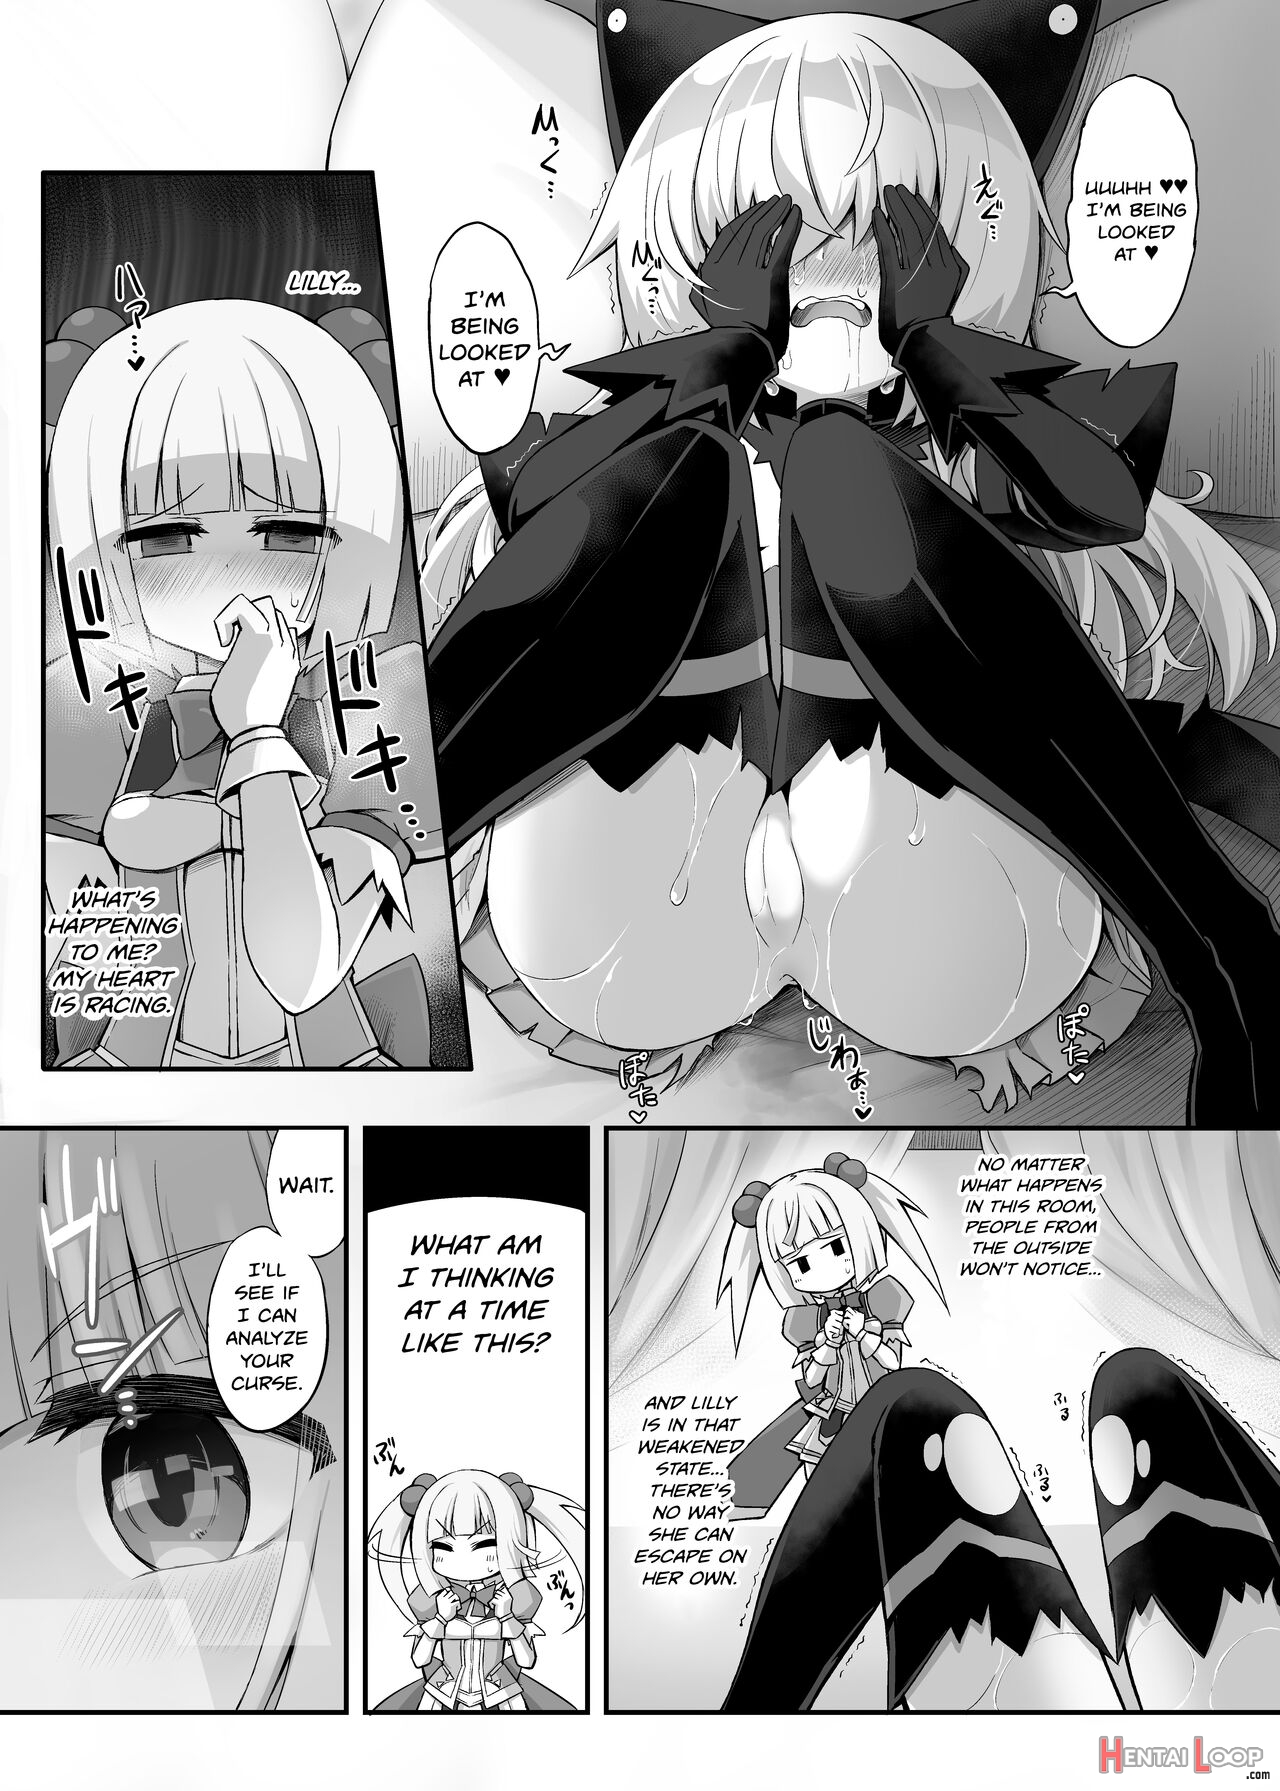 Masochist Cat X Magic Girl ~a Manga In Which The Evil Magical Girl Is Put On A Leash And Domesticated By The Good Magical Girl~ page 14